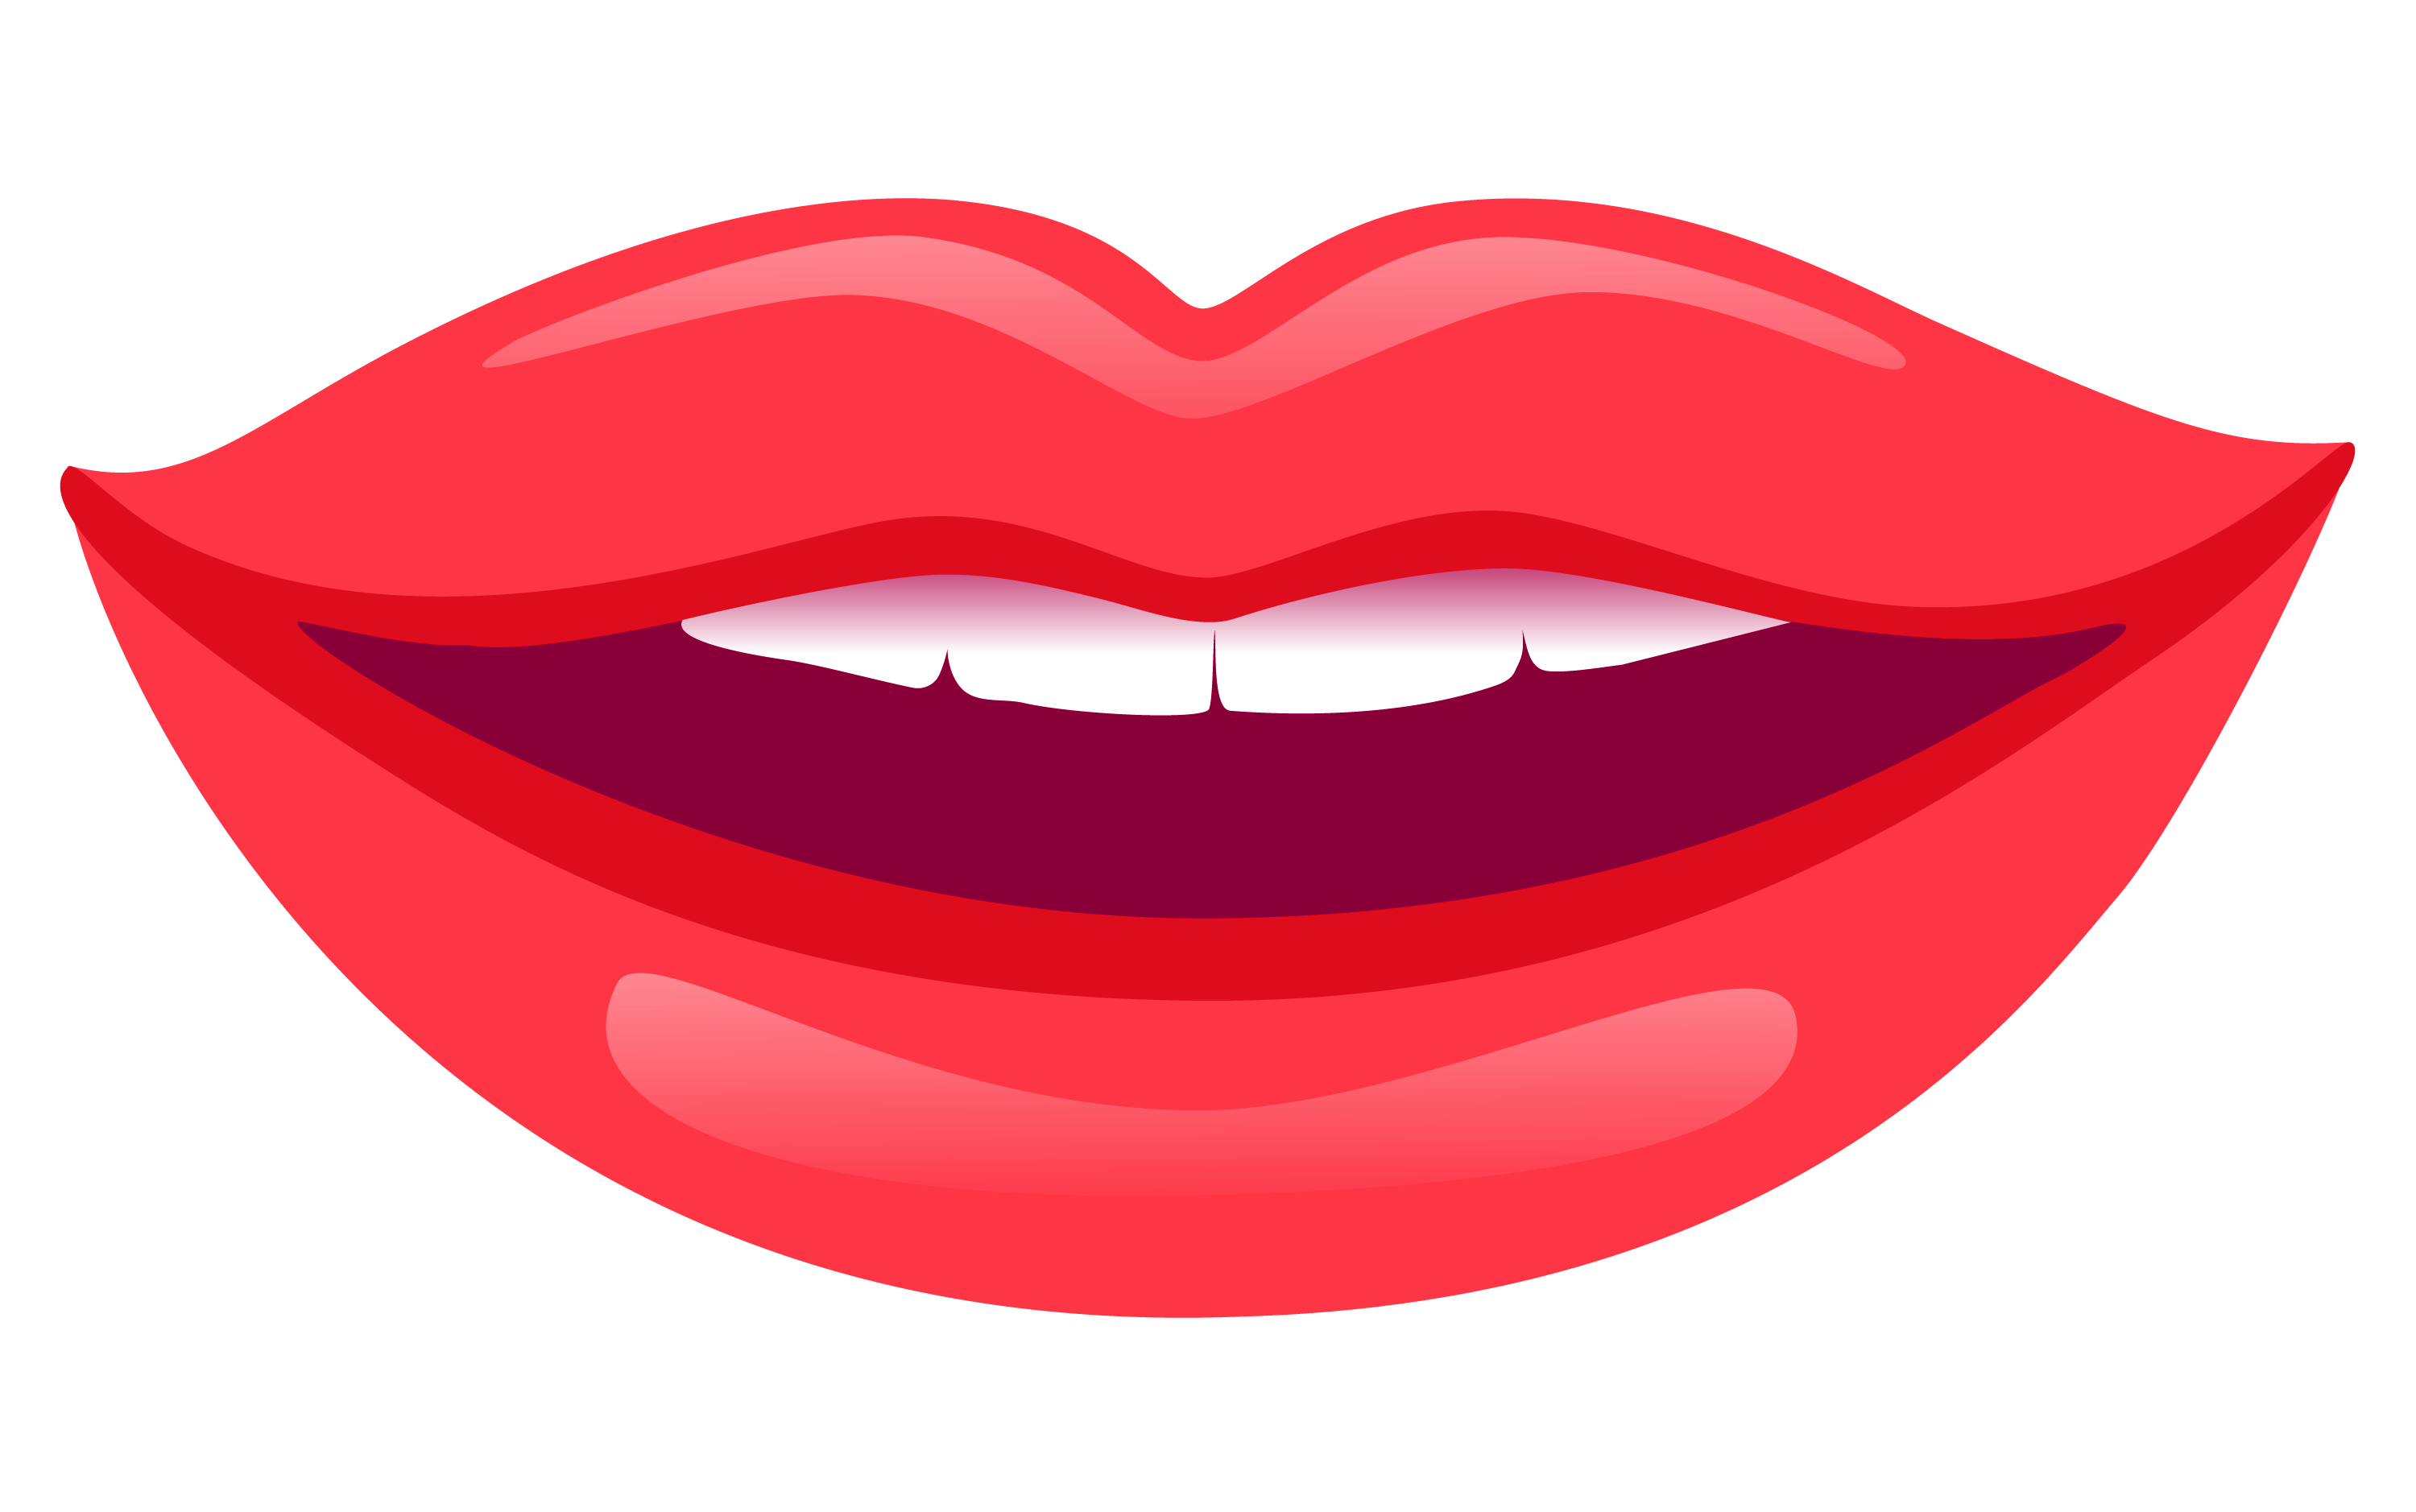 Smiling Lips PNG HD Transparent Smiling Lips HD.PNG Images.